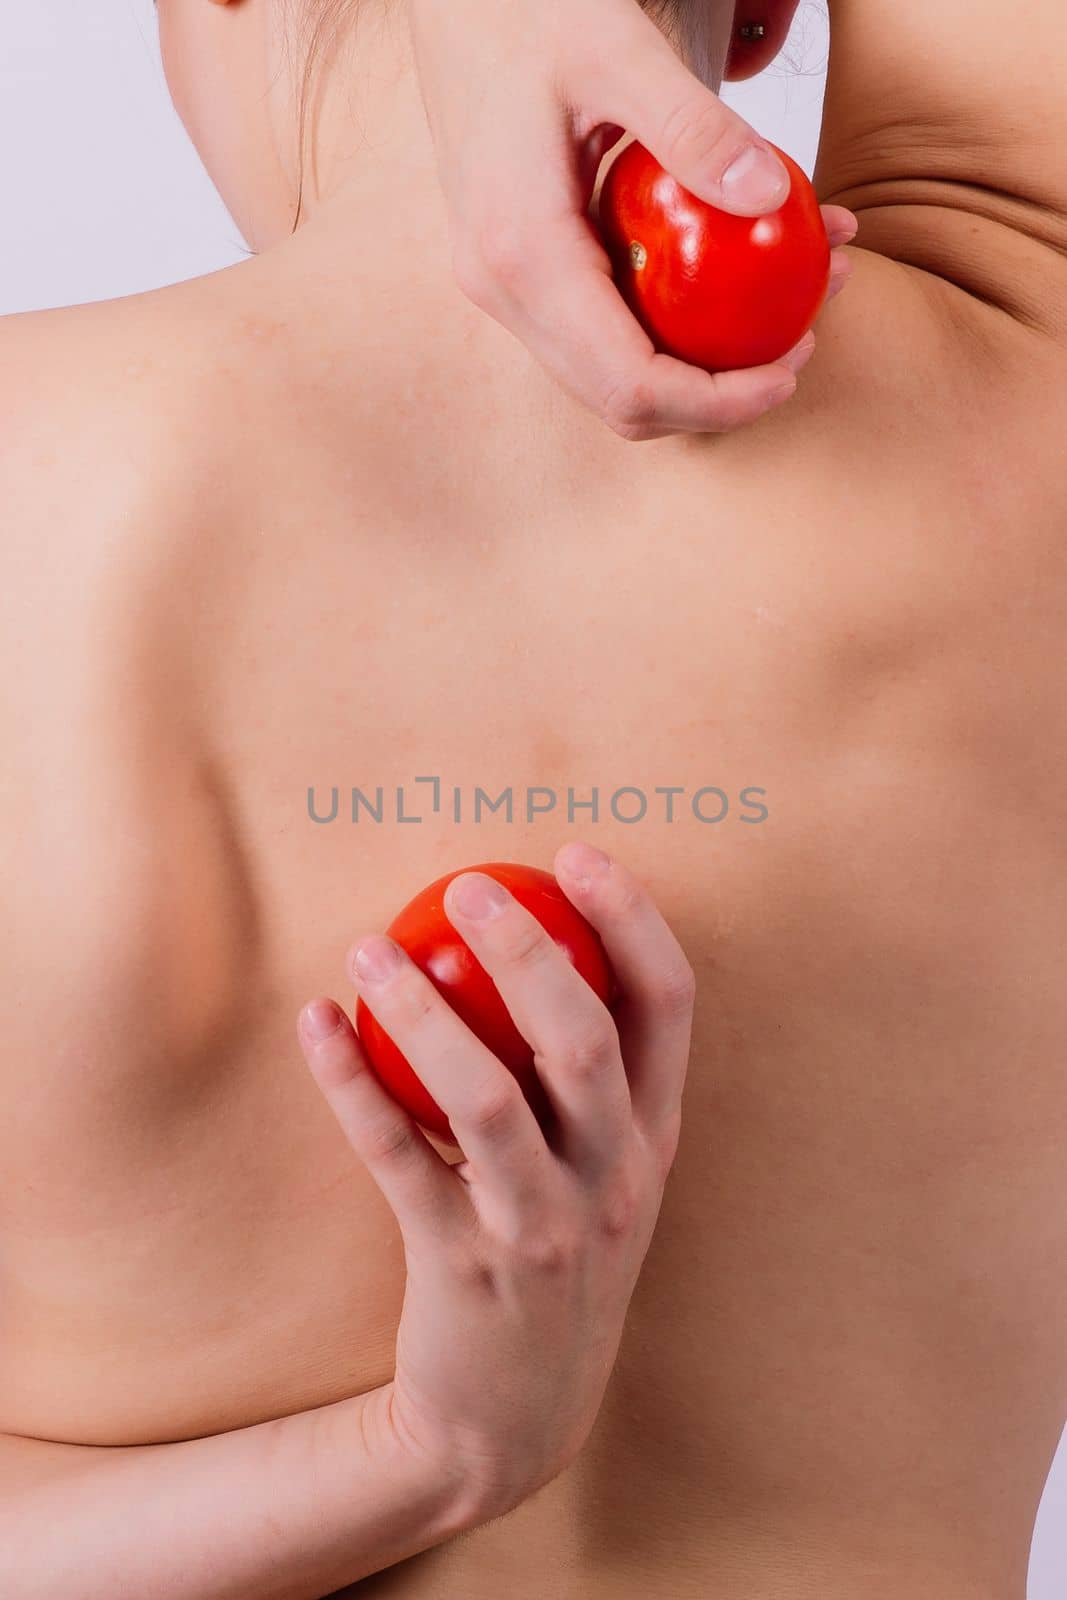 Healthy young woman holding a tomatos over her eyes, laughing, bare shoulders, topless.